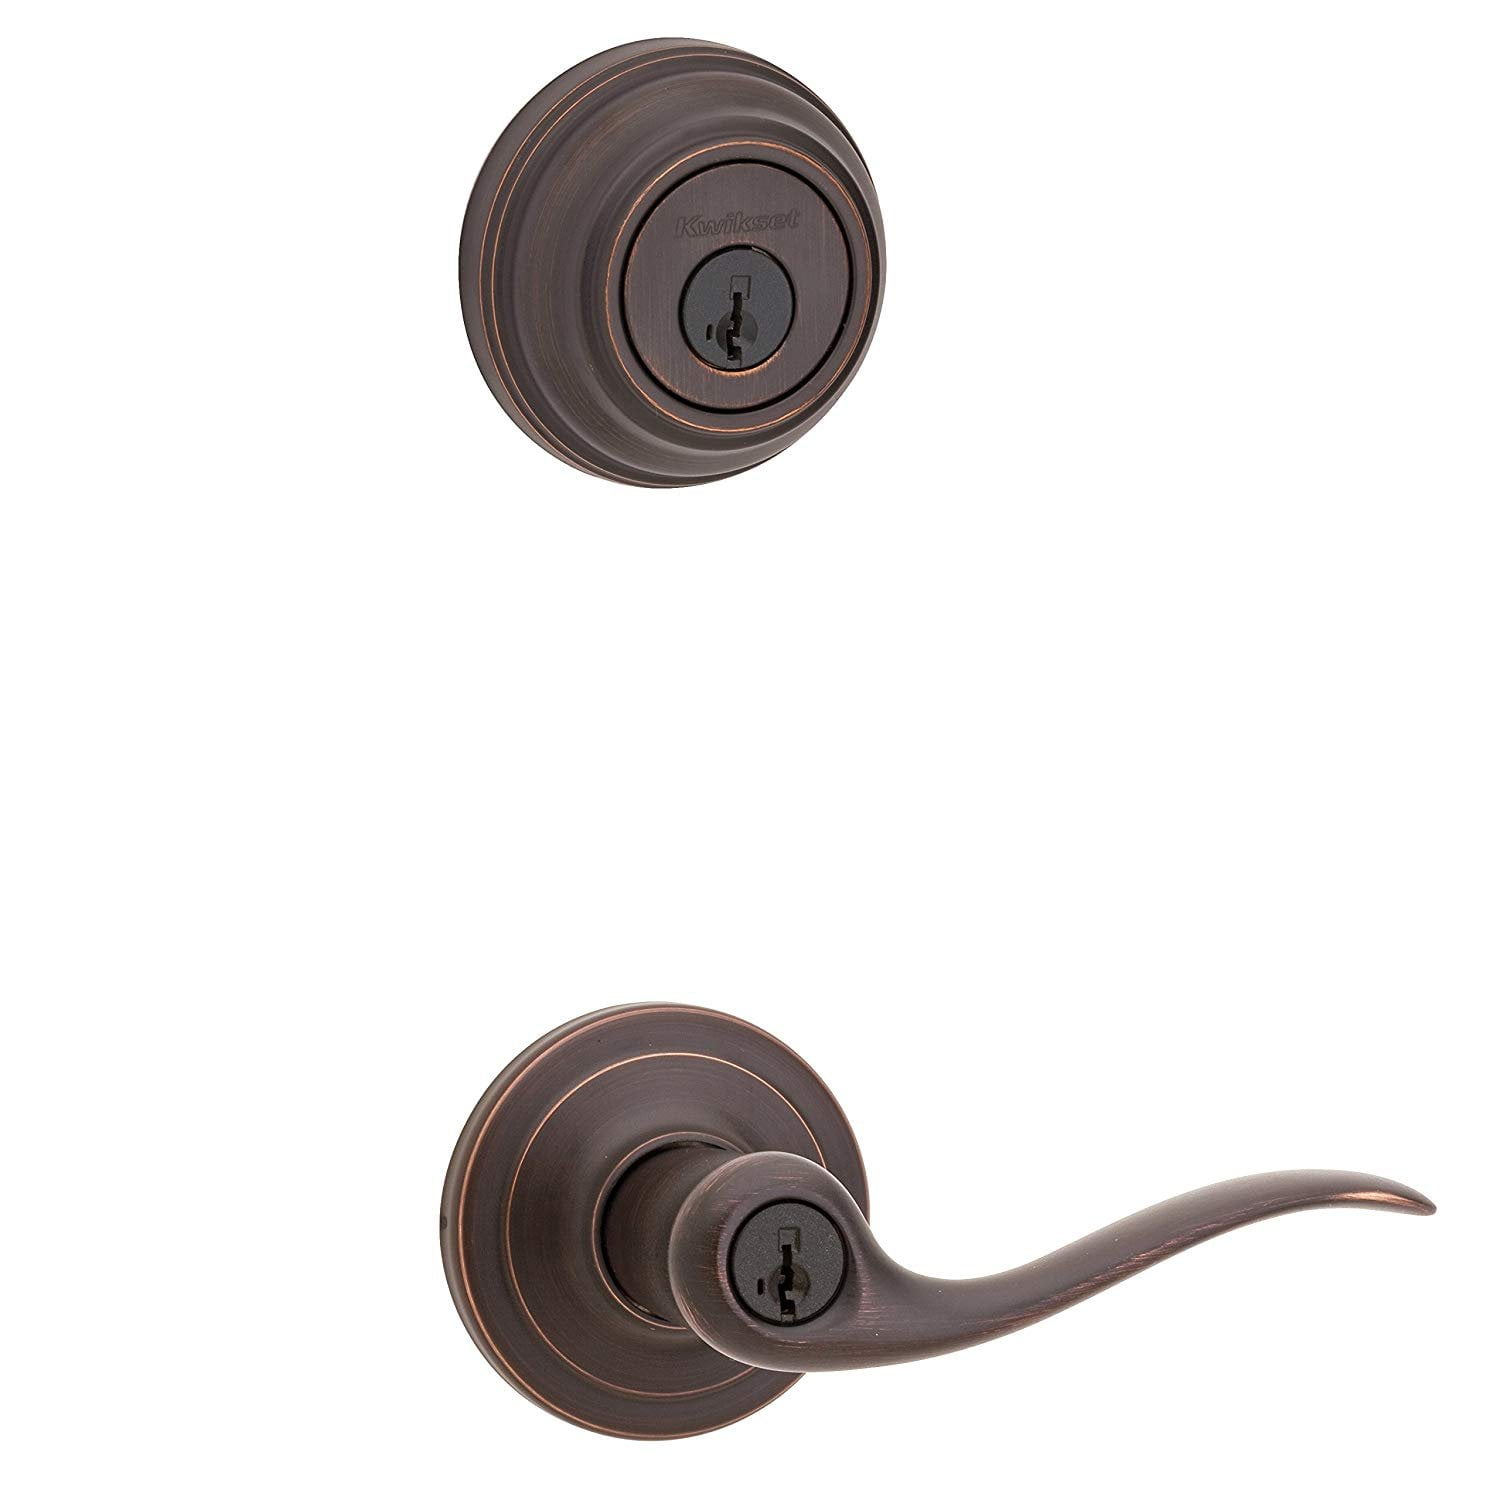 Kwikset 991 Tustin Entry Lever and Single Cylinder Deadbolt Combo Pack featuring  SmartKey in Venetian Bronze